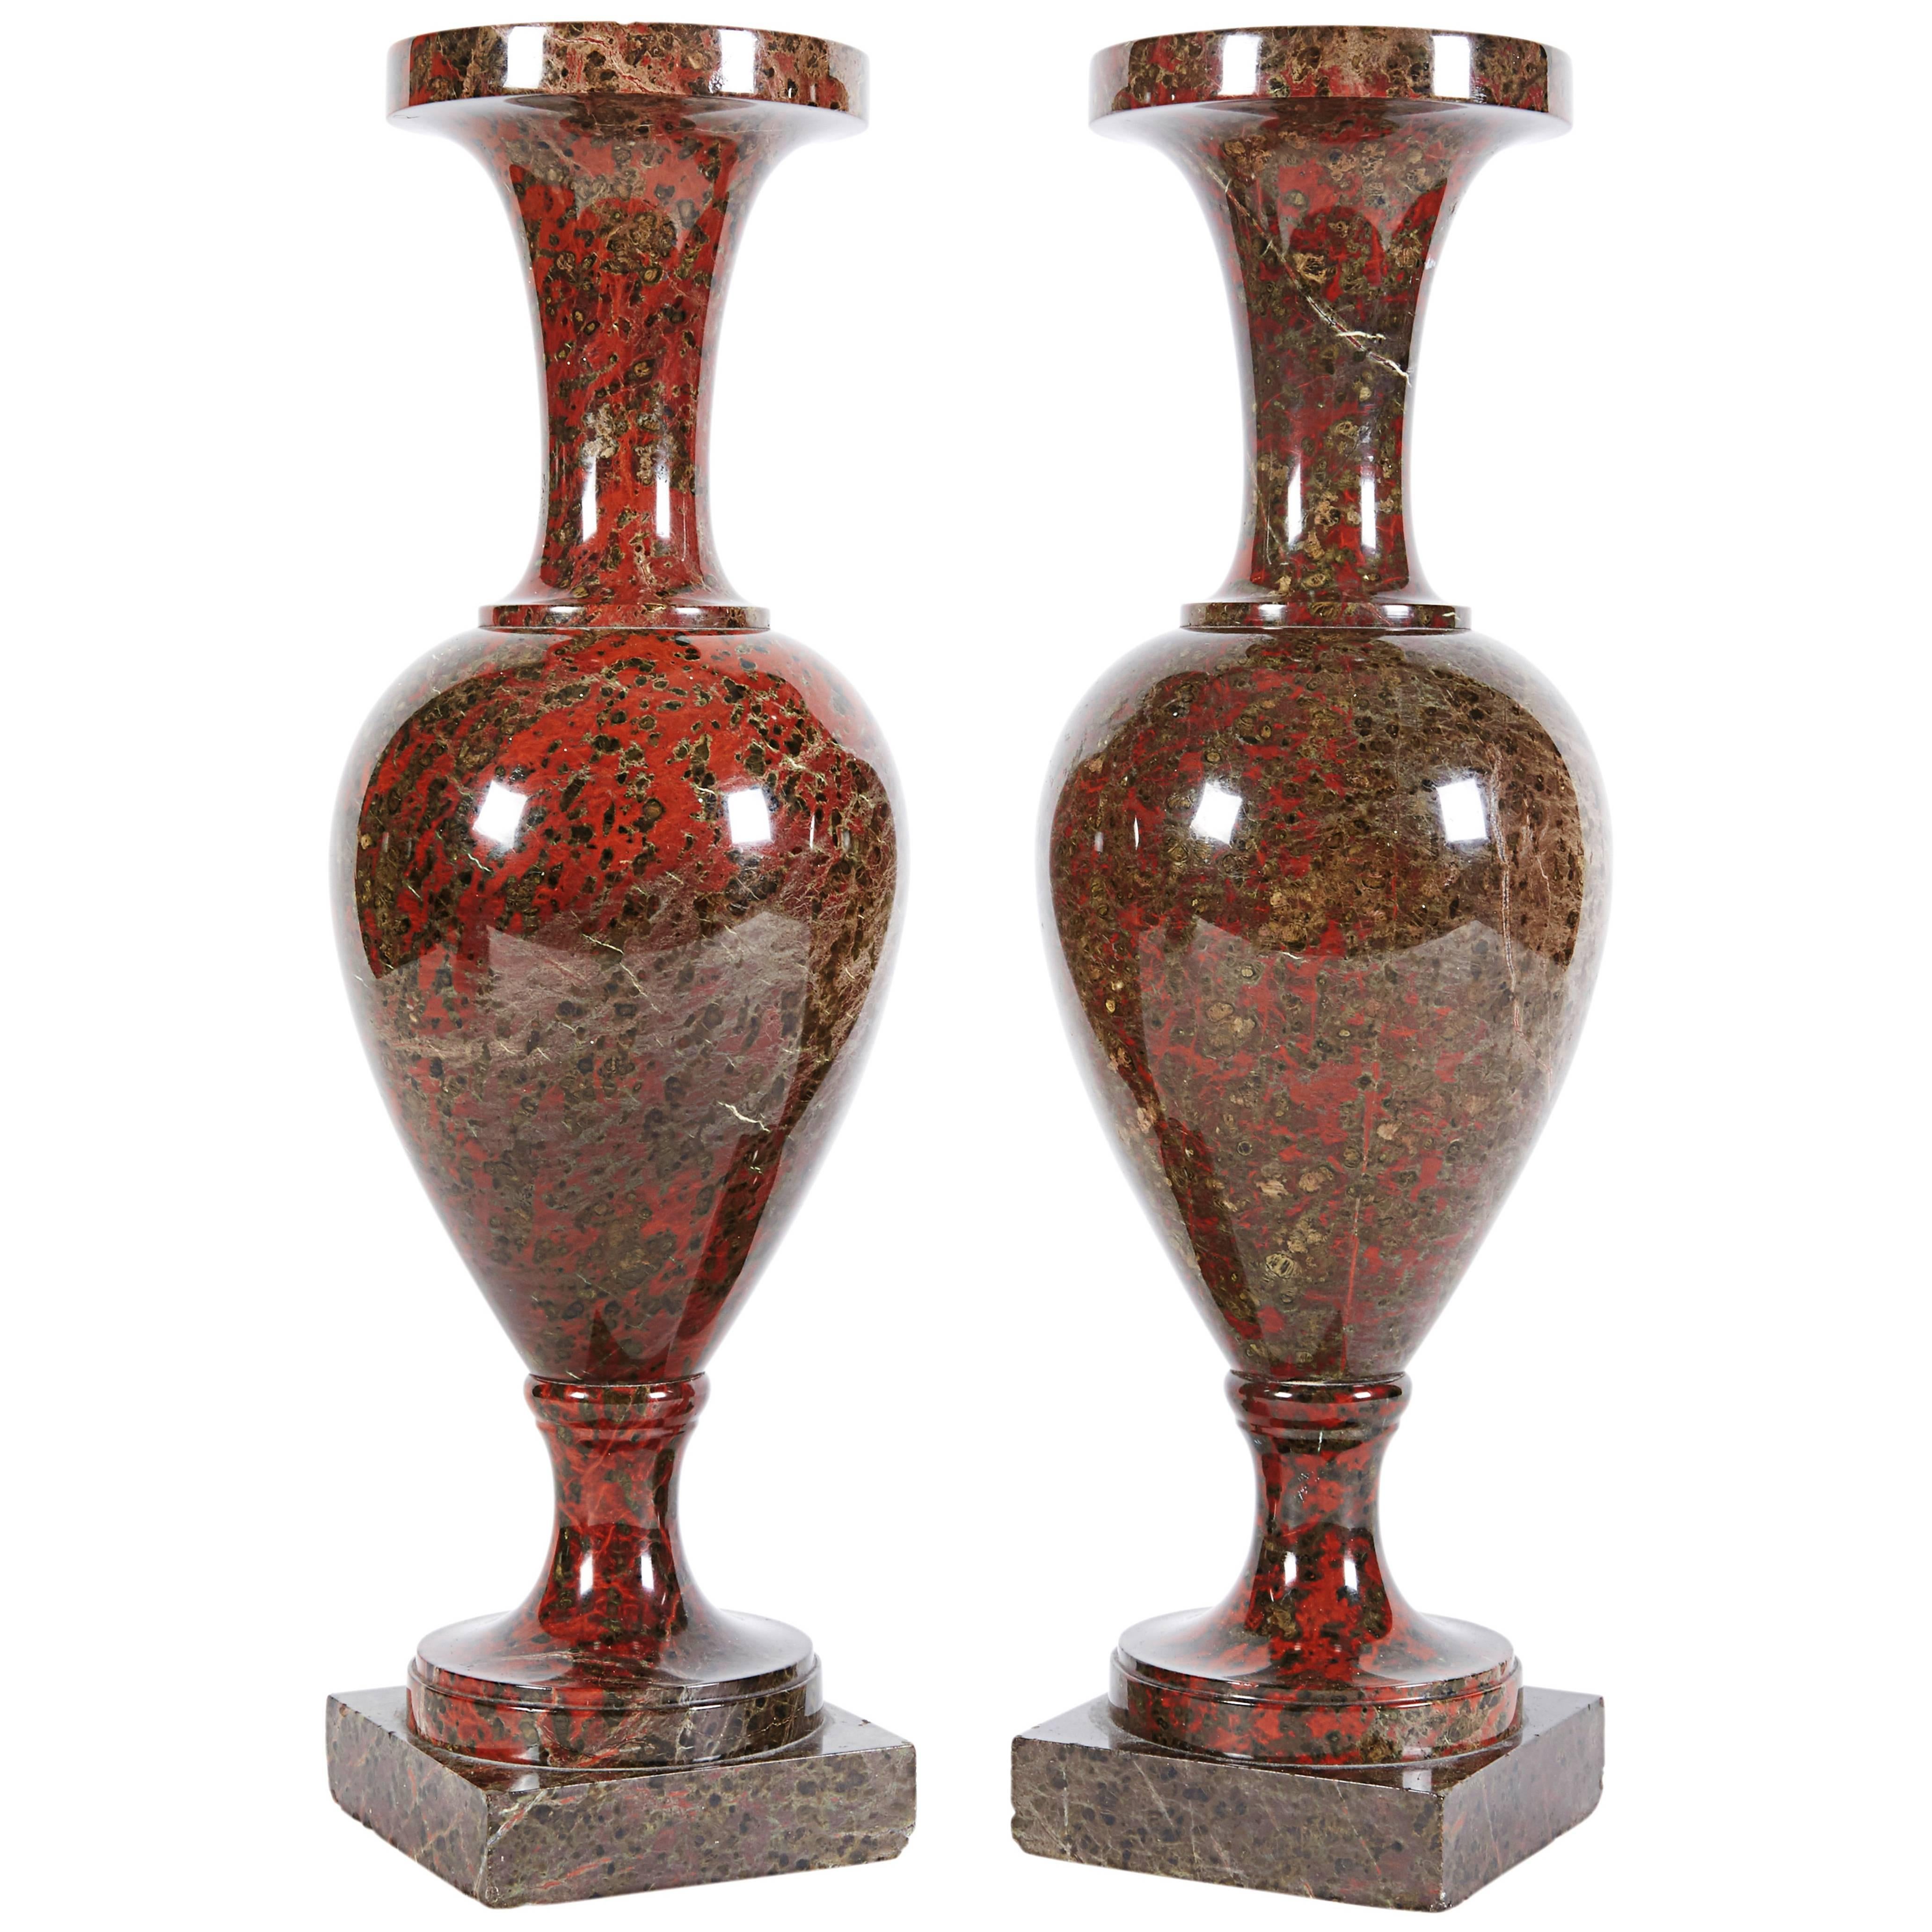 A Pair Of Neoclassical Lizard Serpentine Vases, Cornwall, England 19th century